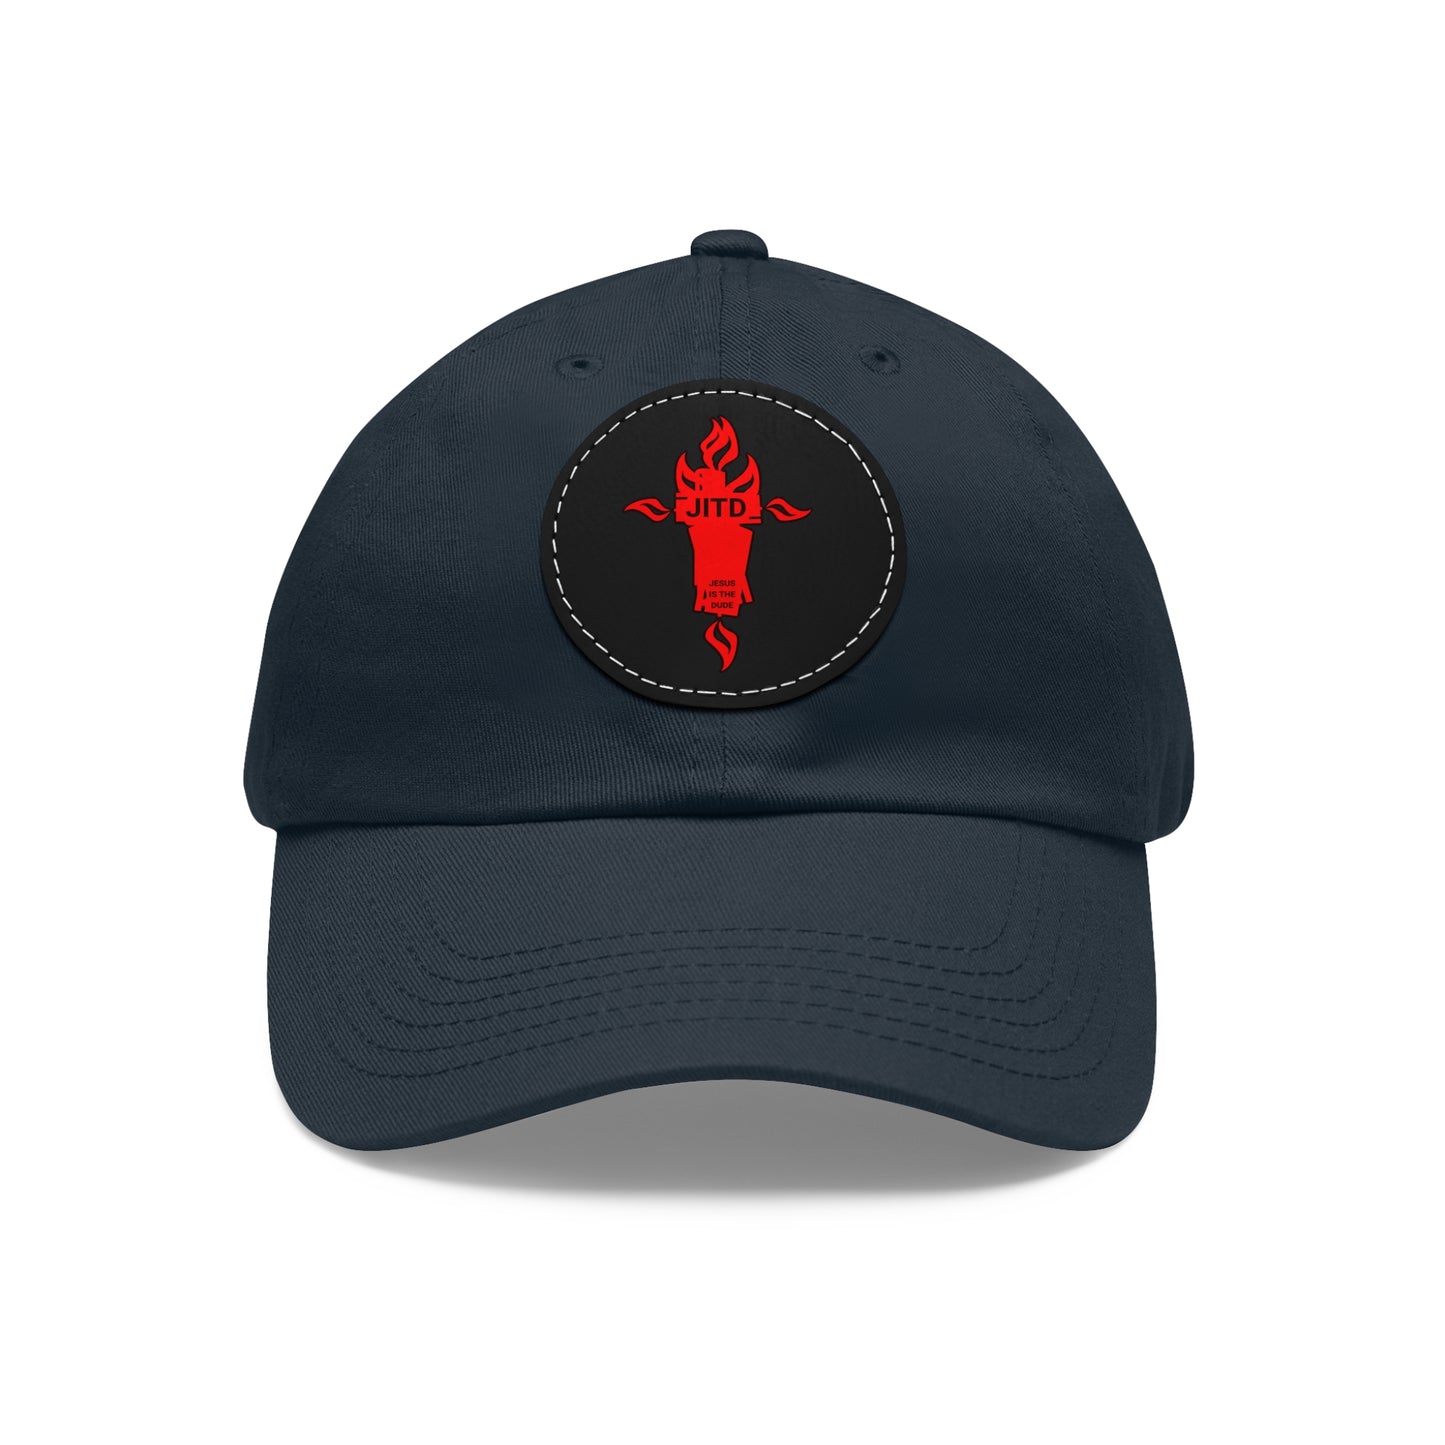 JITD FIRE CROSS HAT WITH LEATHER PATCH